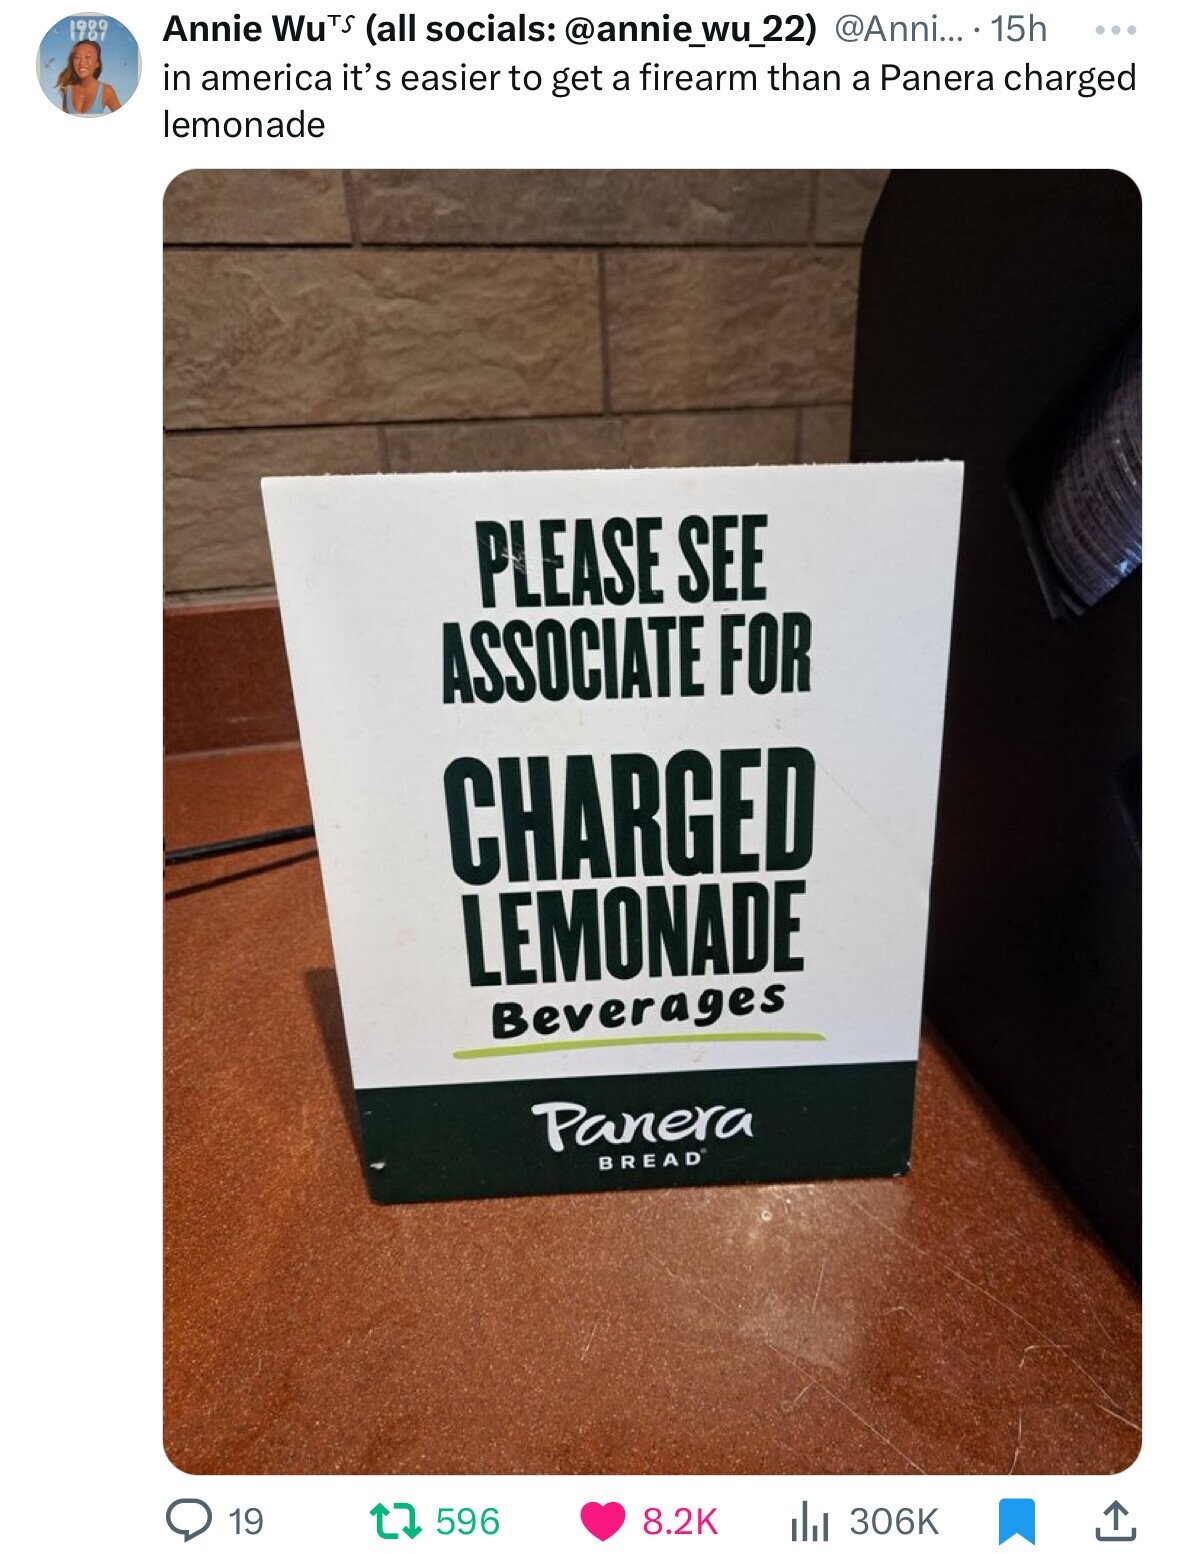 carton - 1999 1767 Annie WuTS all socials .... 15h in america it's easier to get a firearm than a Panera charged lemonade 19 Please See Associate For Charged Lemonade Beverages t 596 Panera Bread il